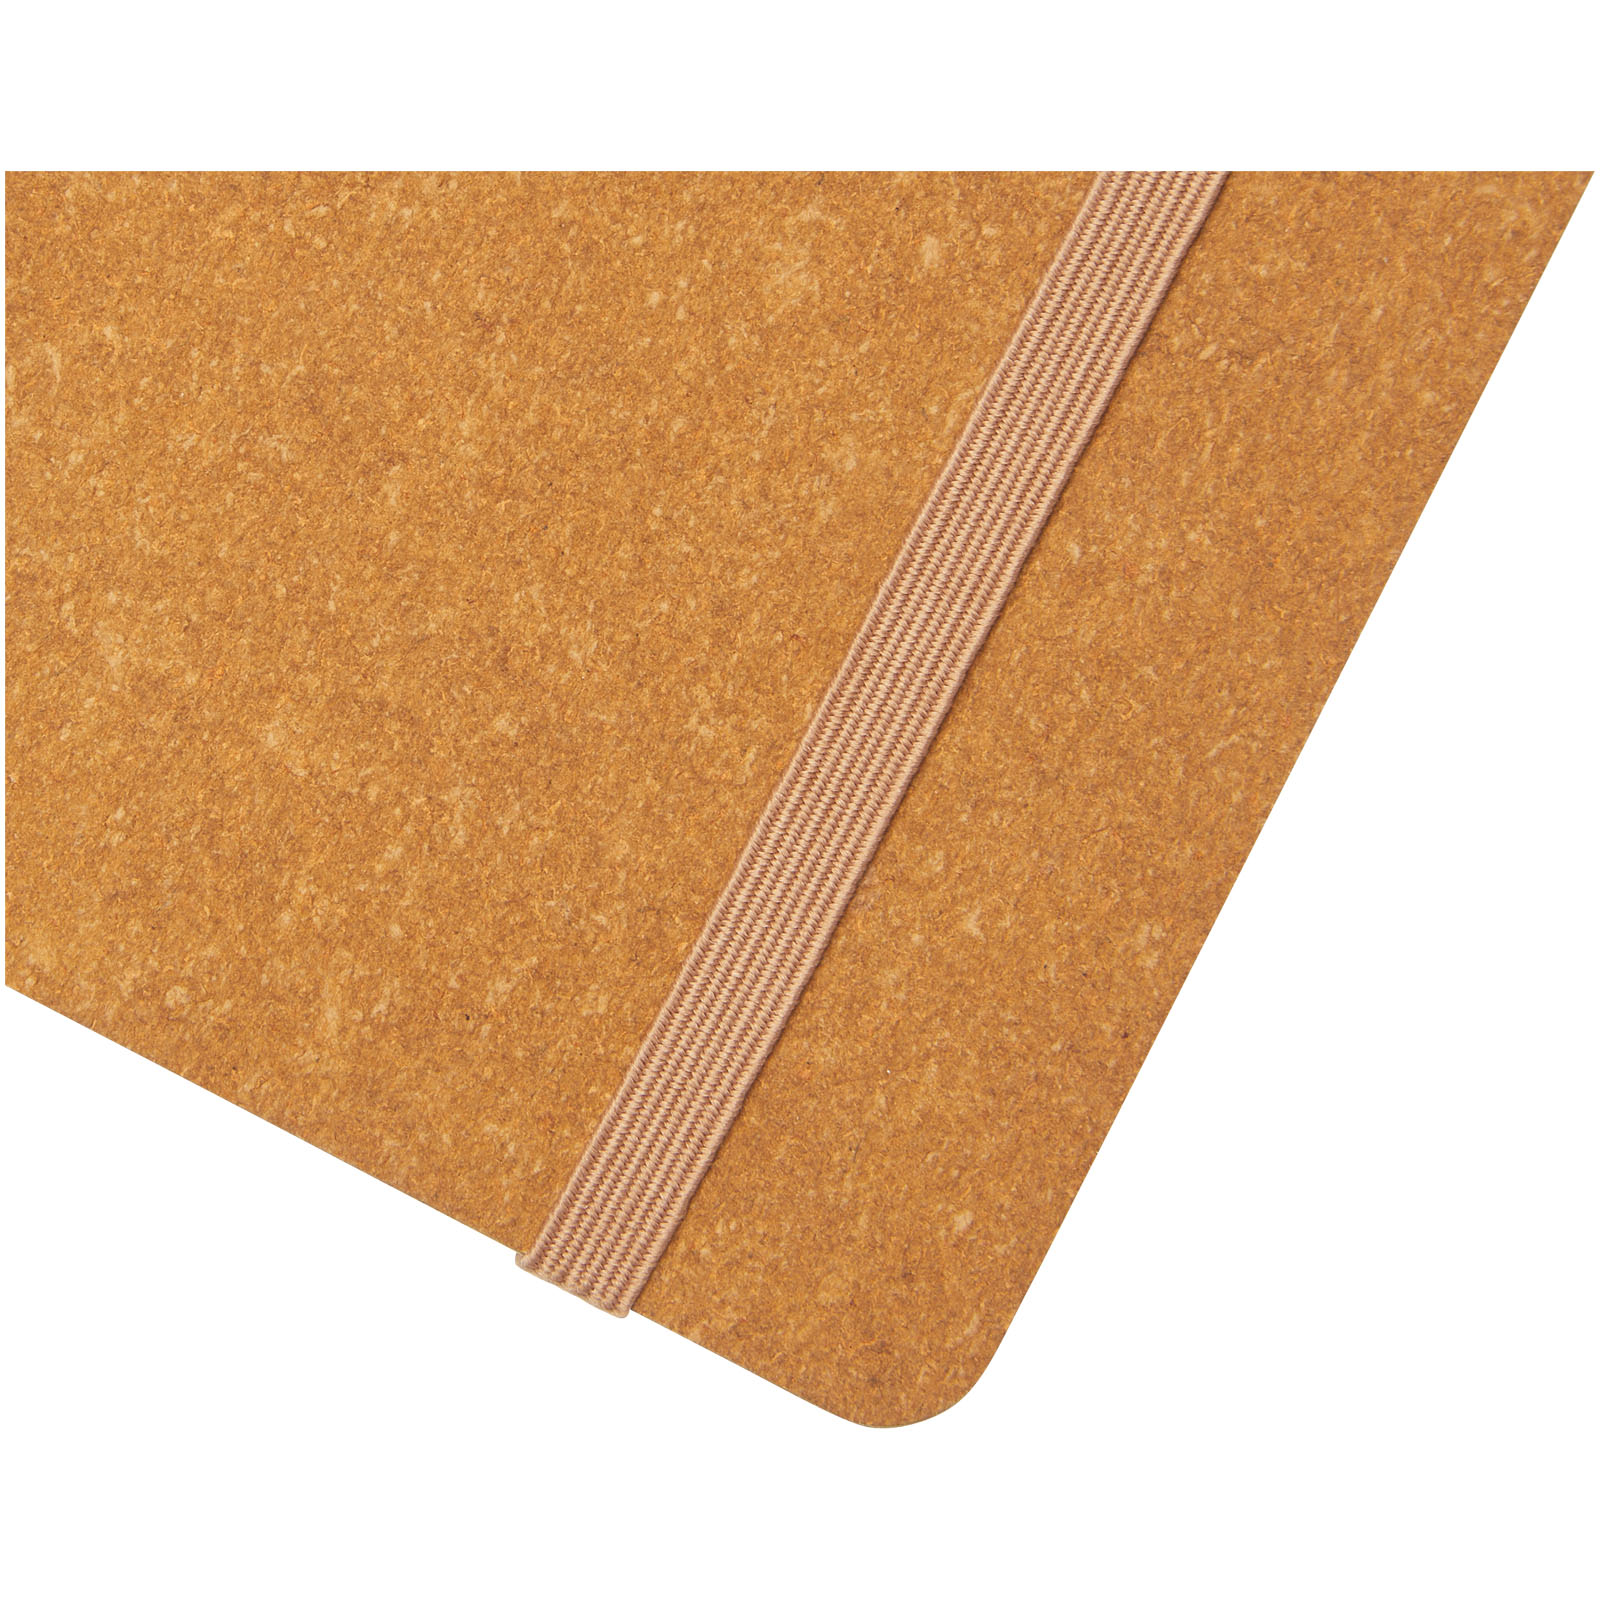 Advertising Soft cover notebooks - Kilau recycled leather notebook  - 5